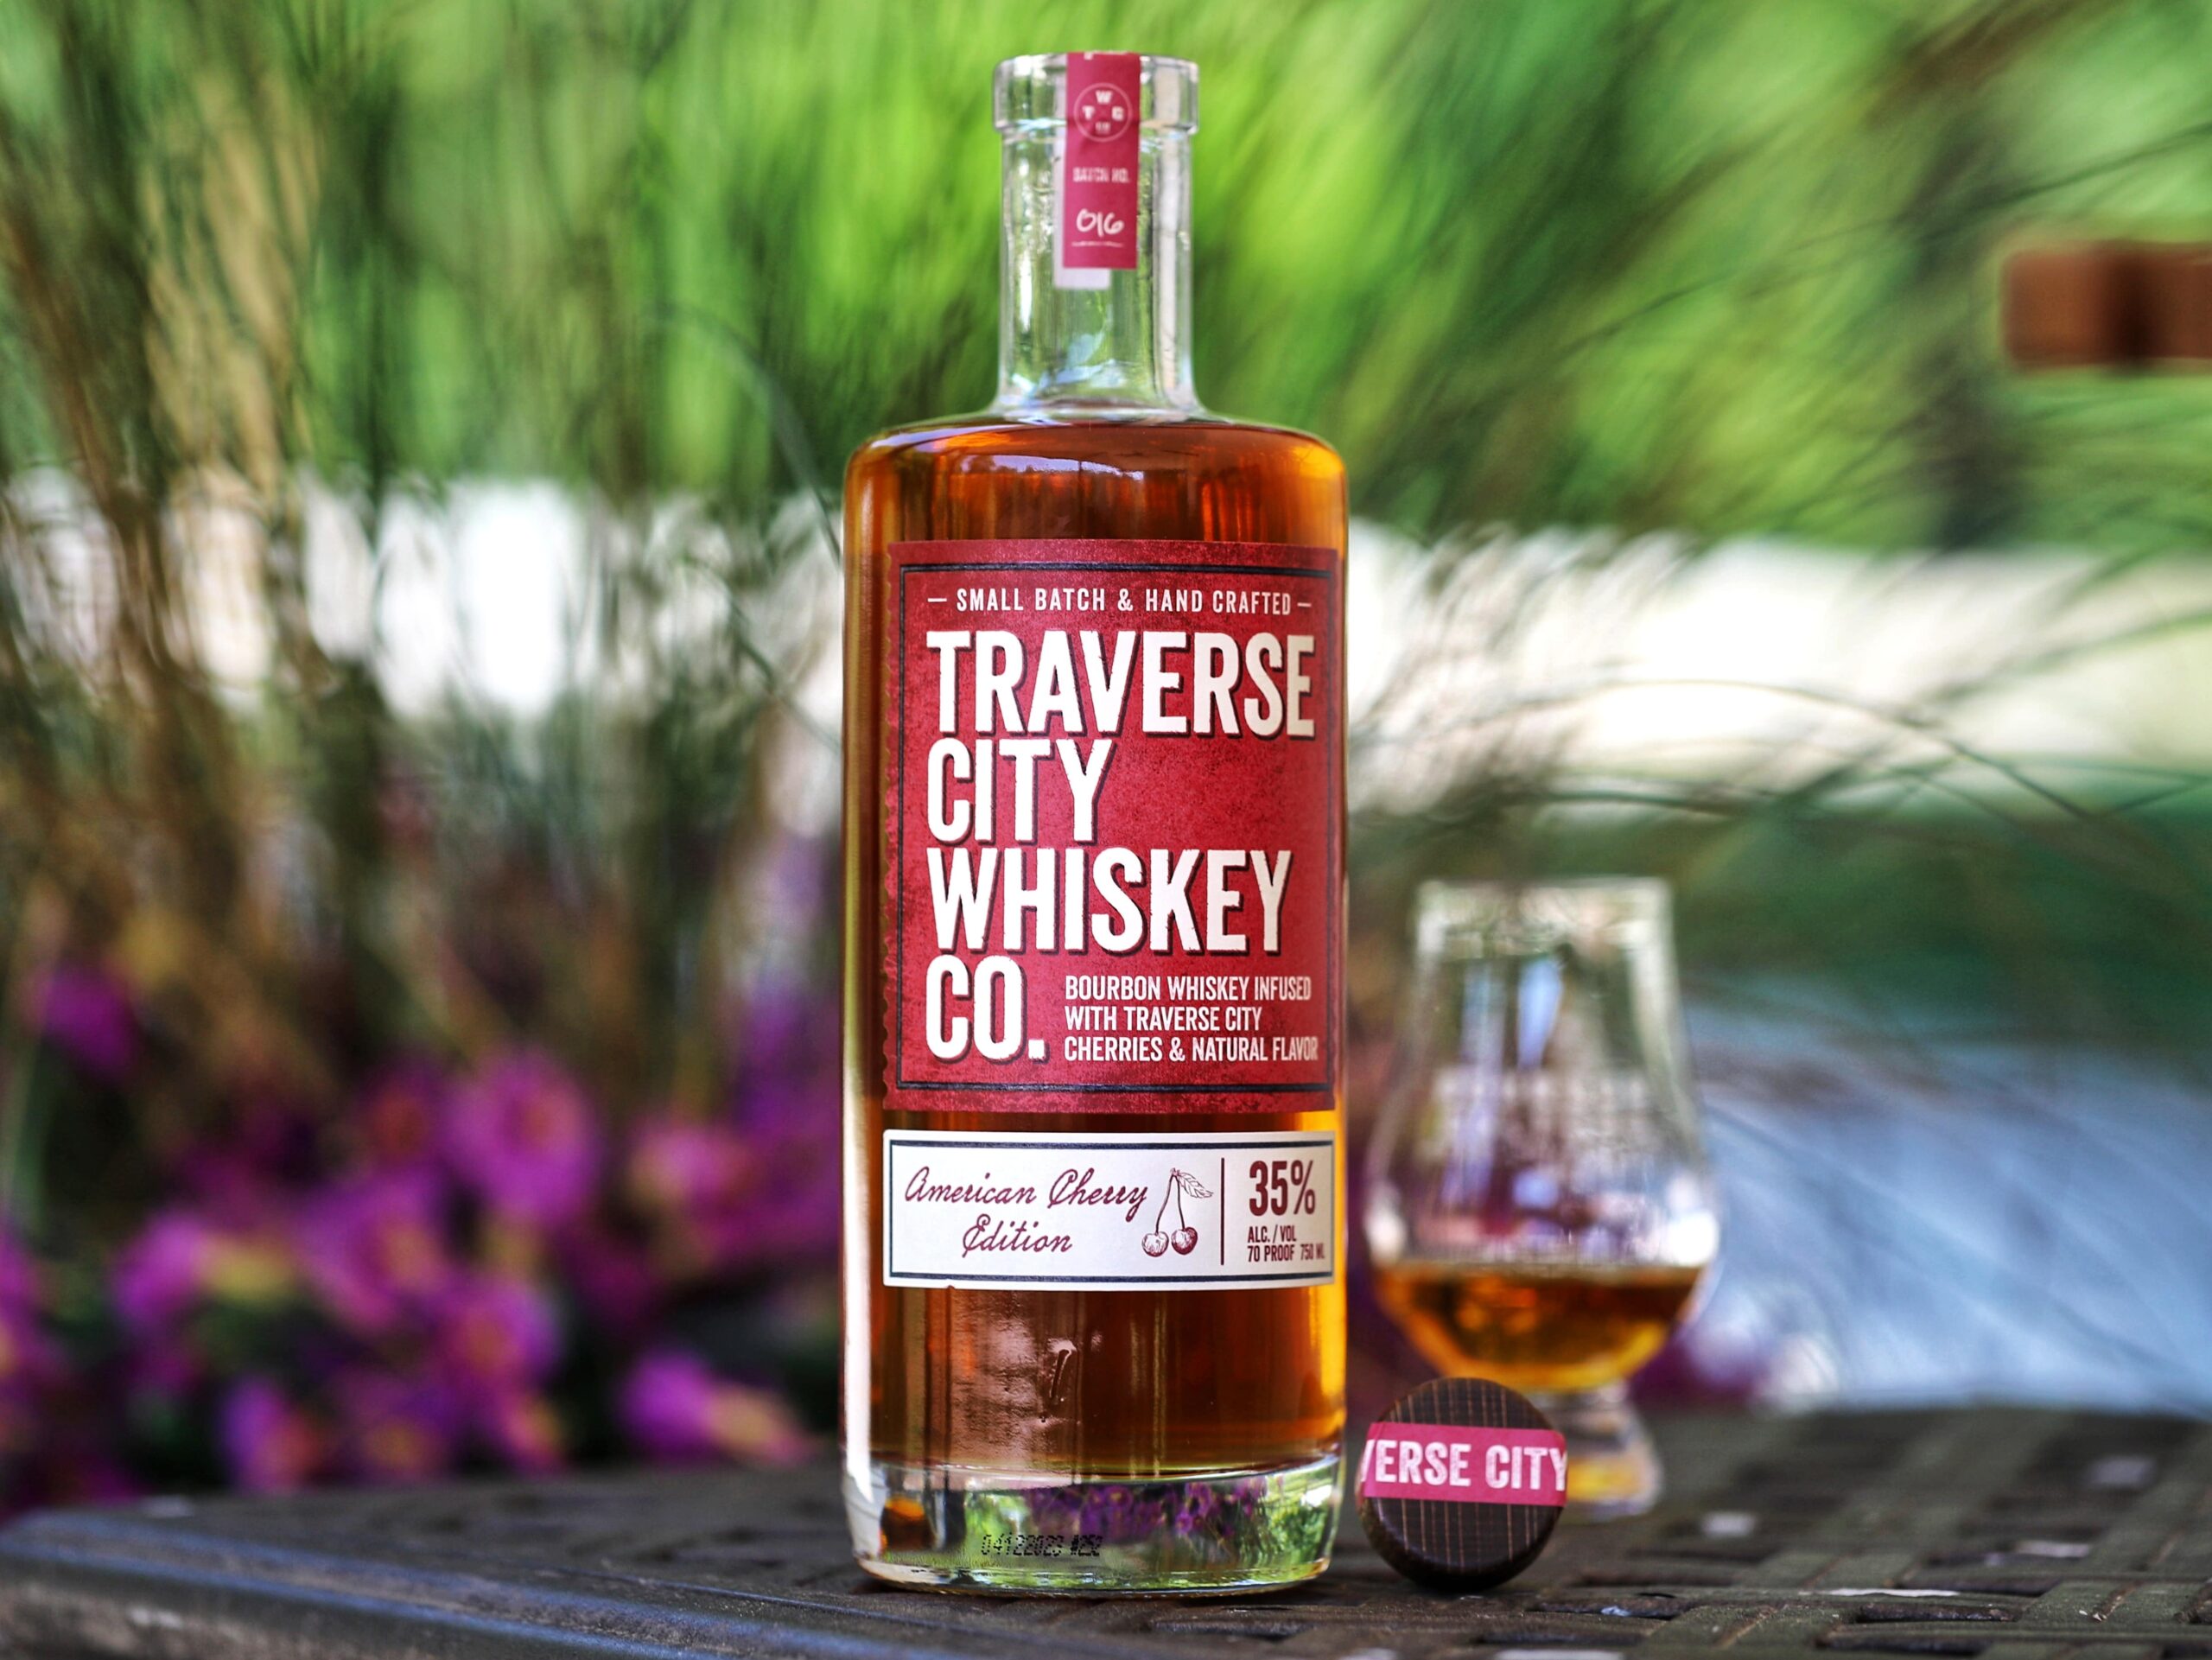 Traverse City Whiskey Co. American Cherry Edition Review